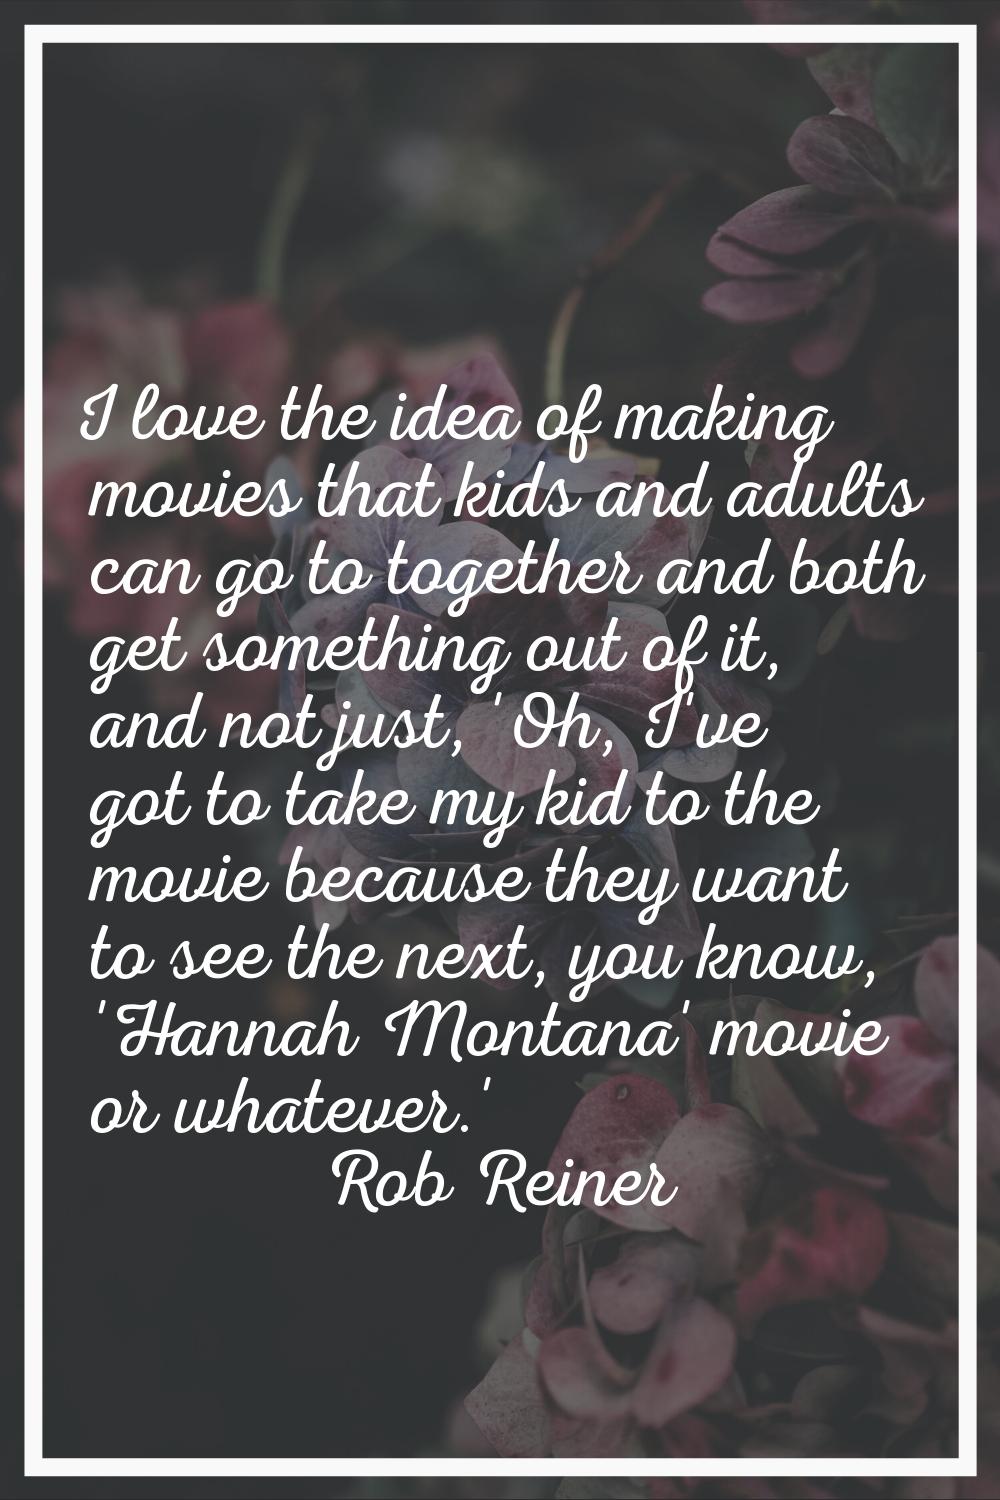 I love the idea of making movies that kids and adults can go to together and both get something out